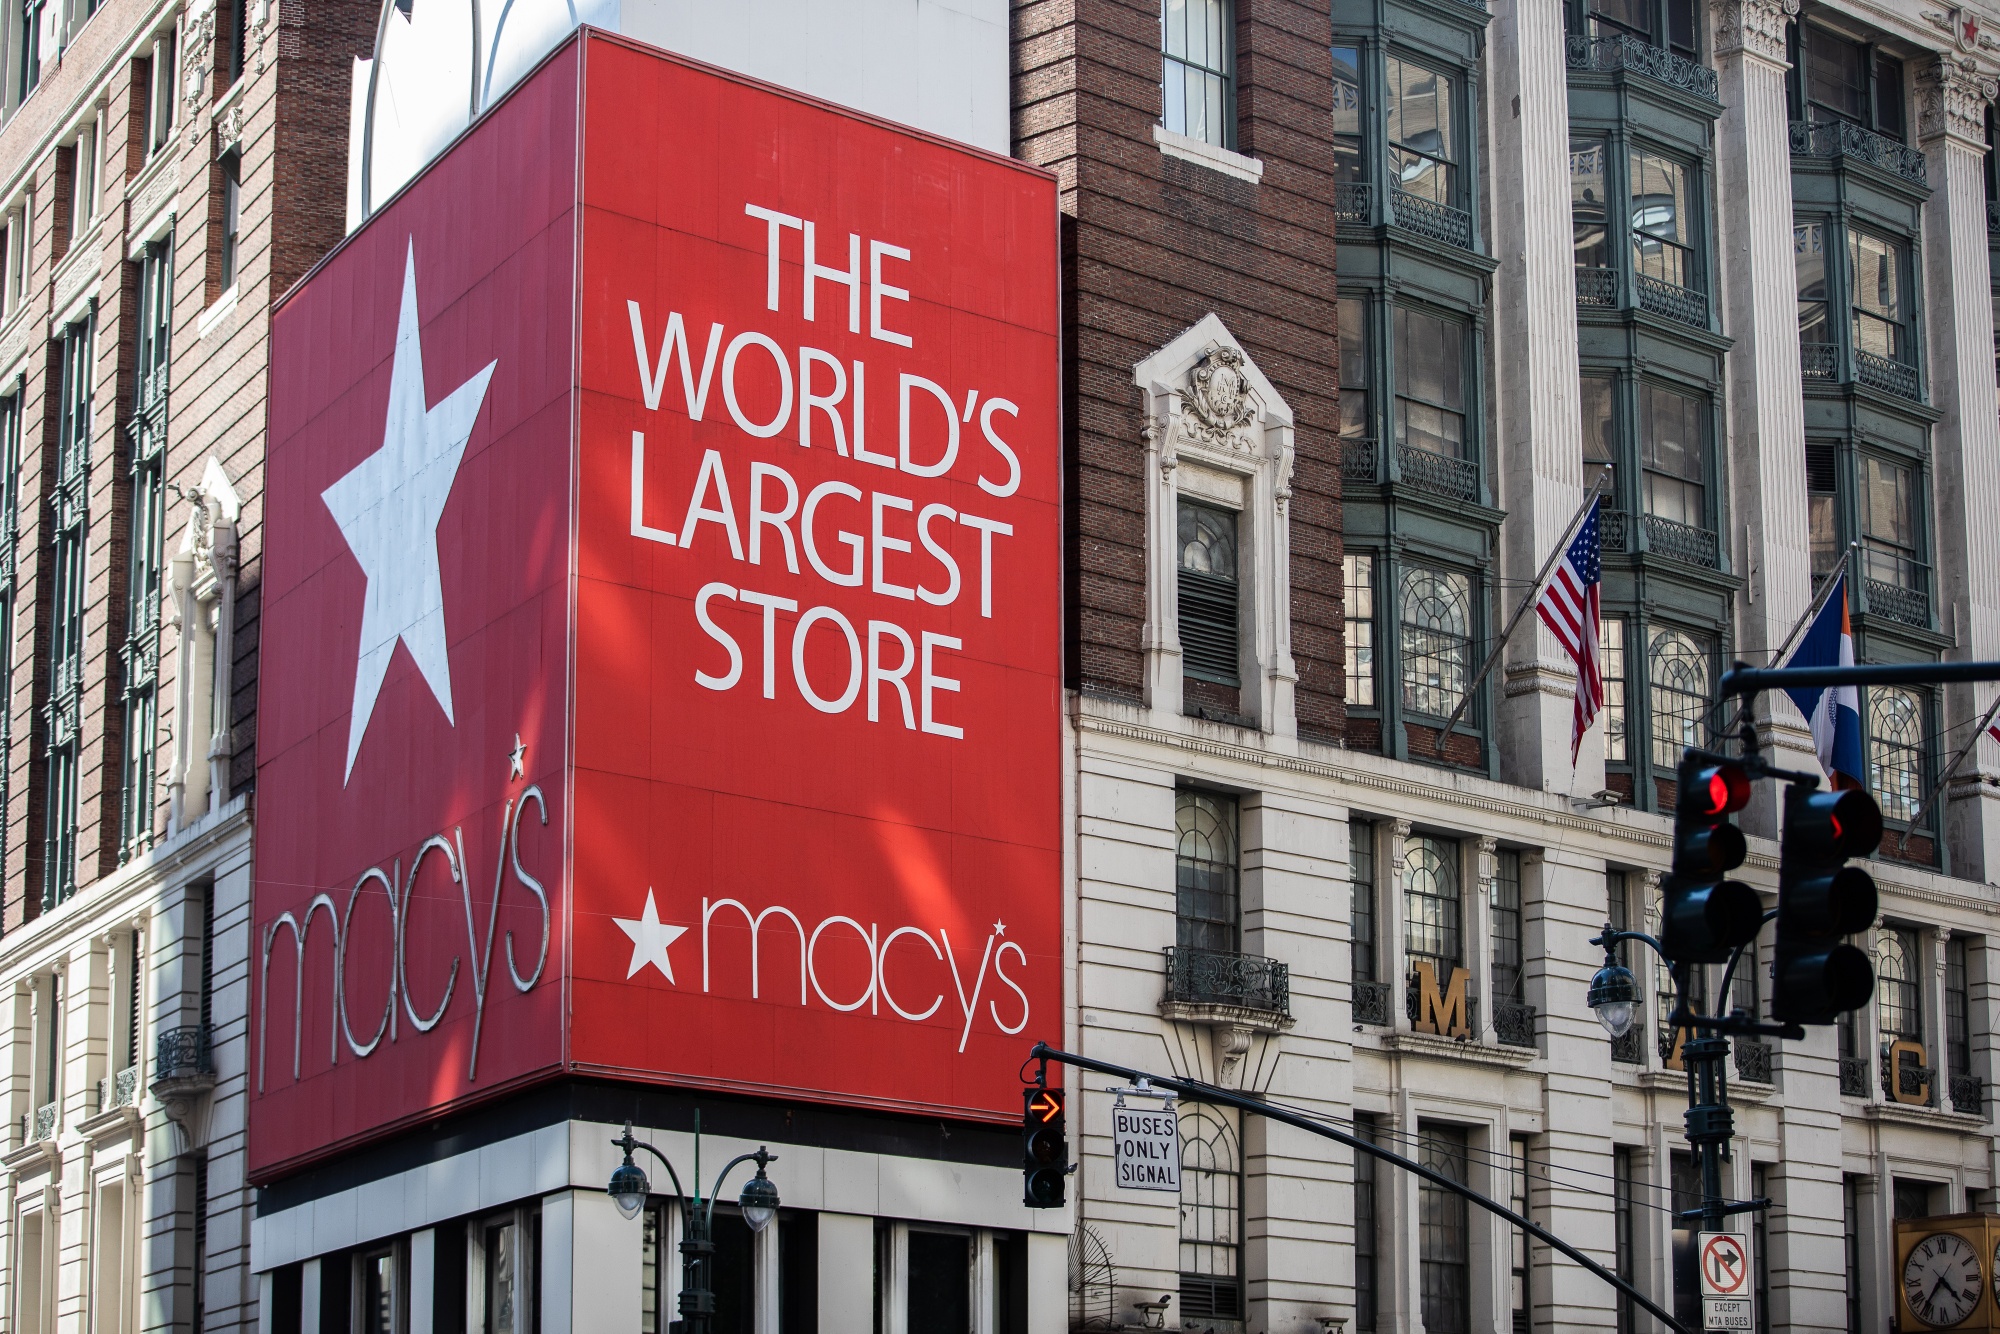 Is Macy's Open? NYC Store May Reopen for Pickup, Limited Service